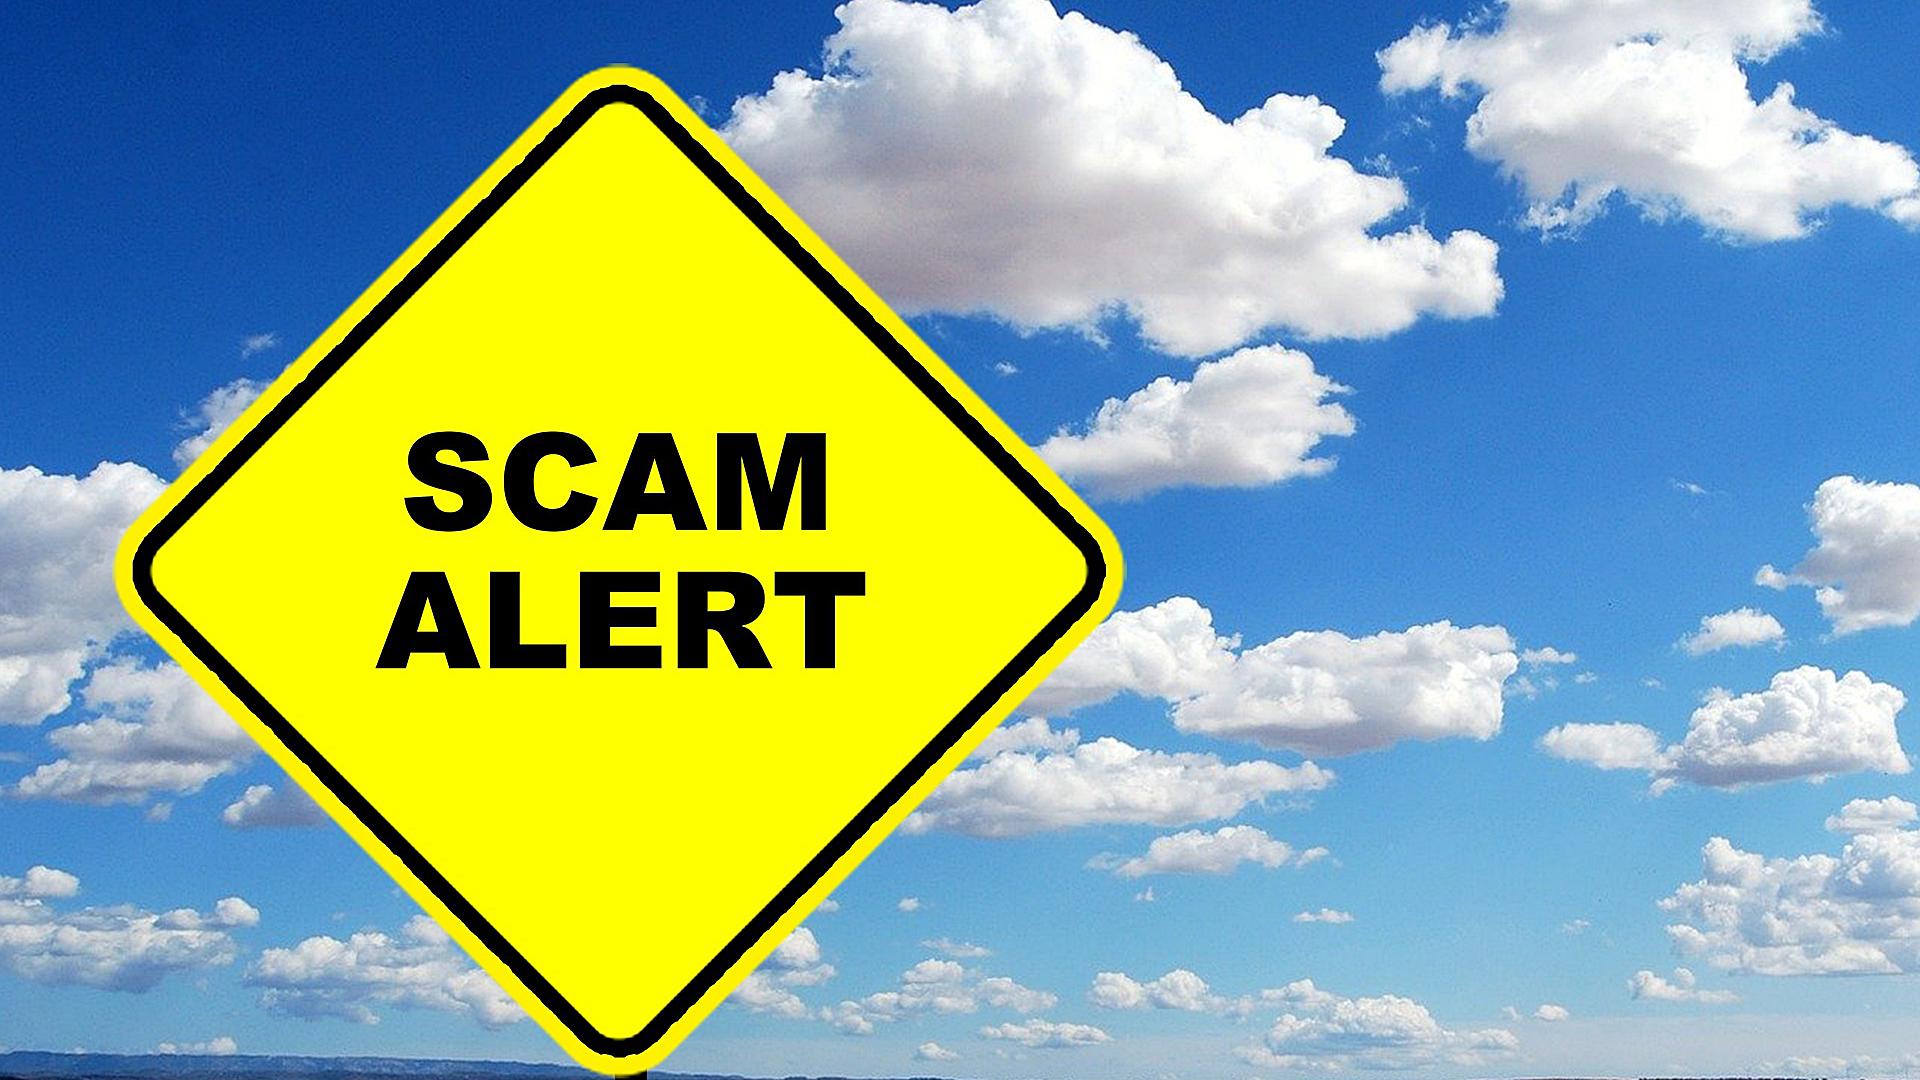 Intercontinental Realty Scam - Cost a Timeshare Owner $300,000